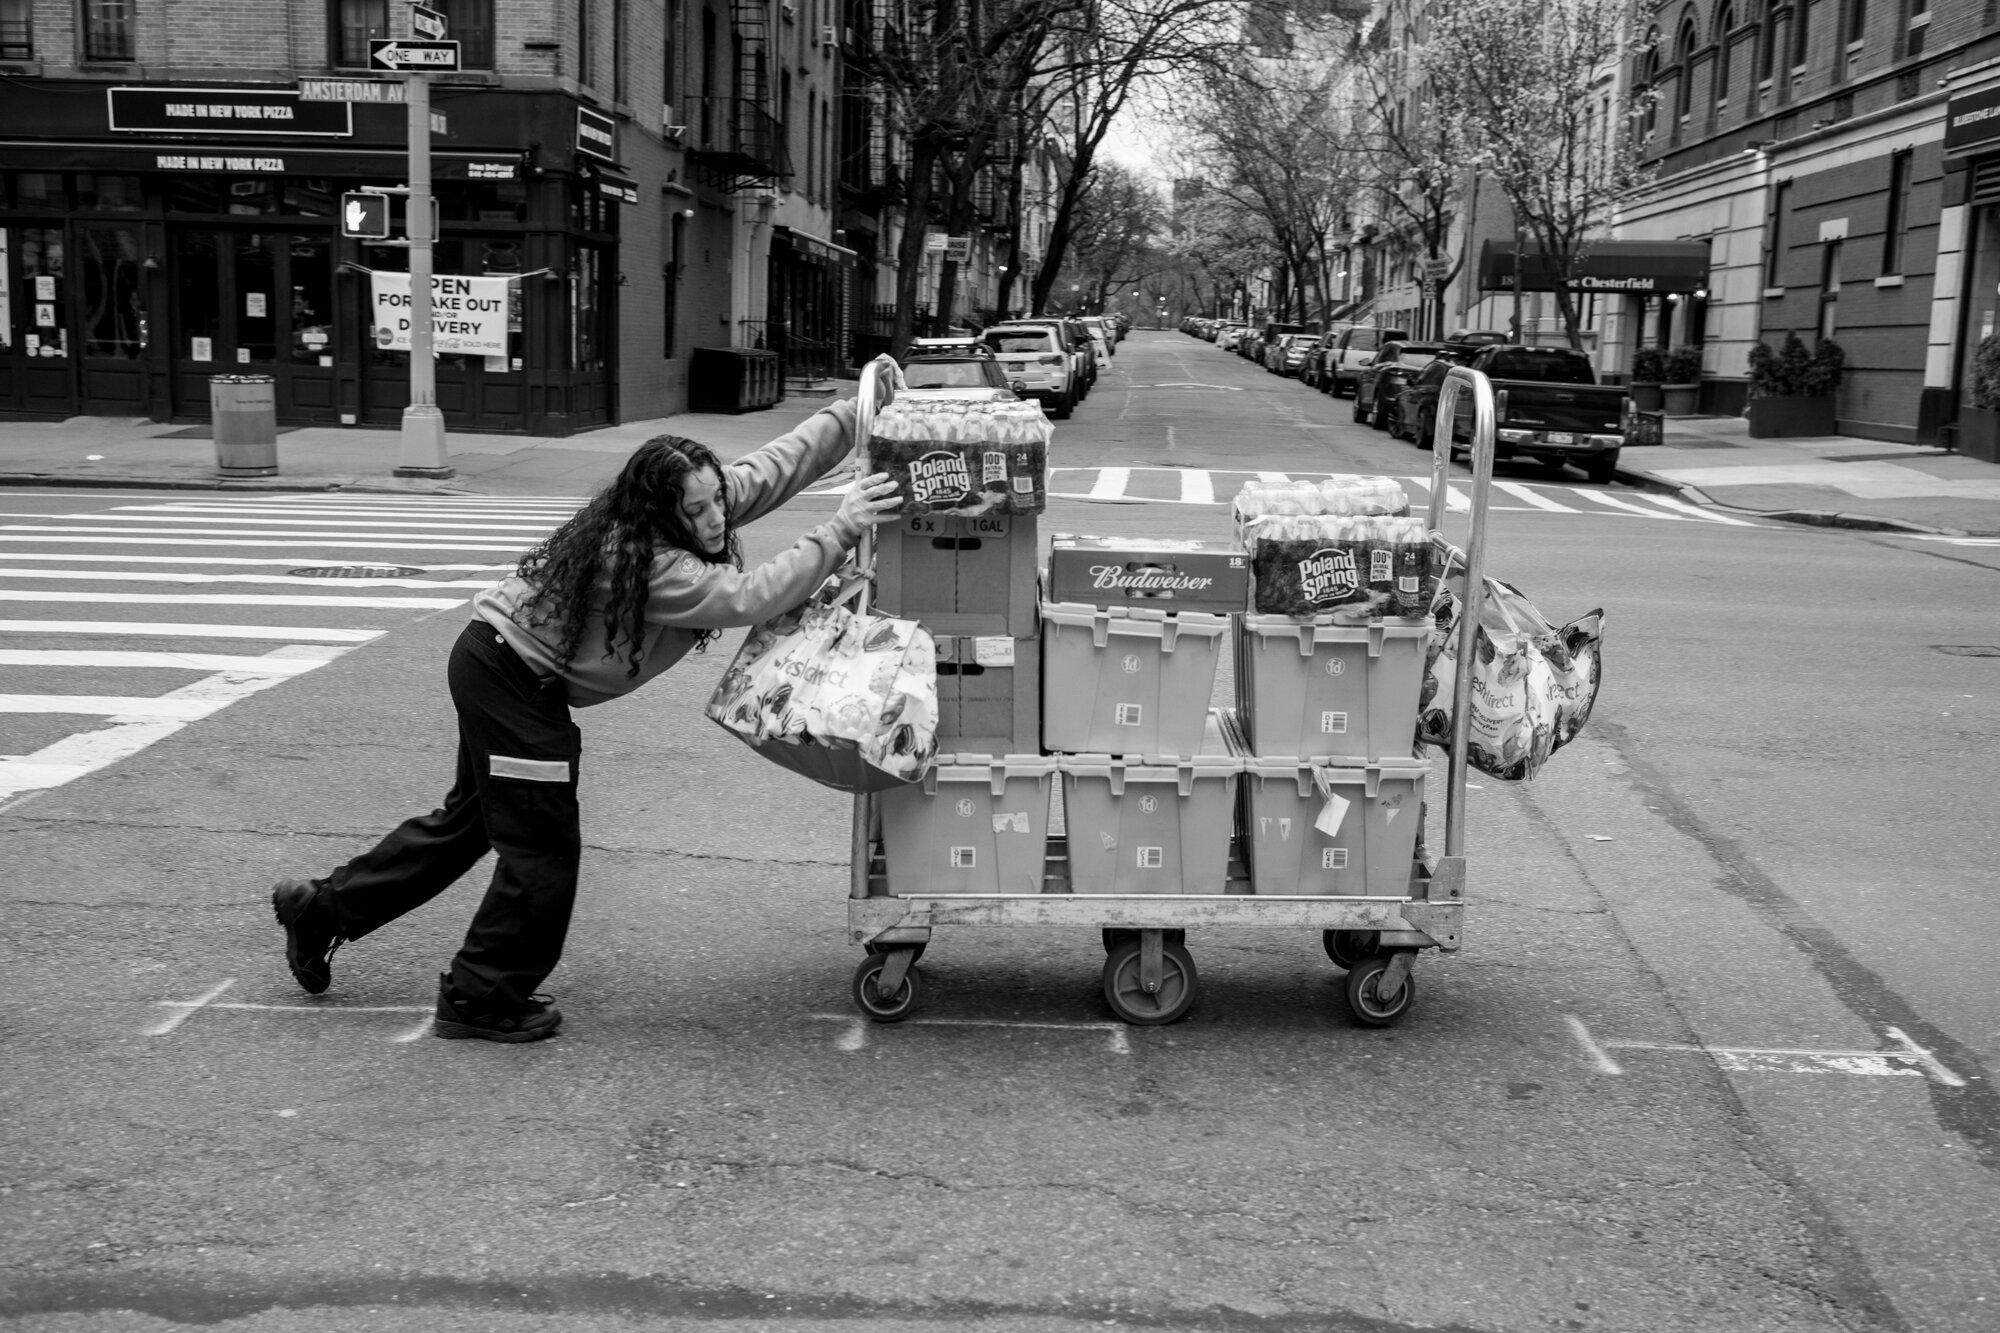  A woman delivers packages to a local store on the Upper Westside on Amsterdam Ave.  March 28, 2020. © Peter Turnley.  ID# 06-013 